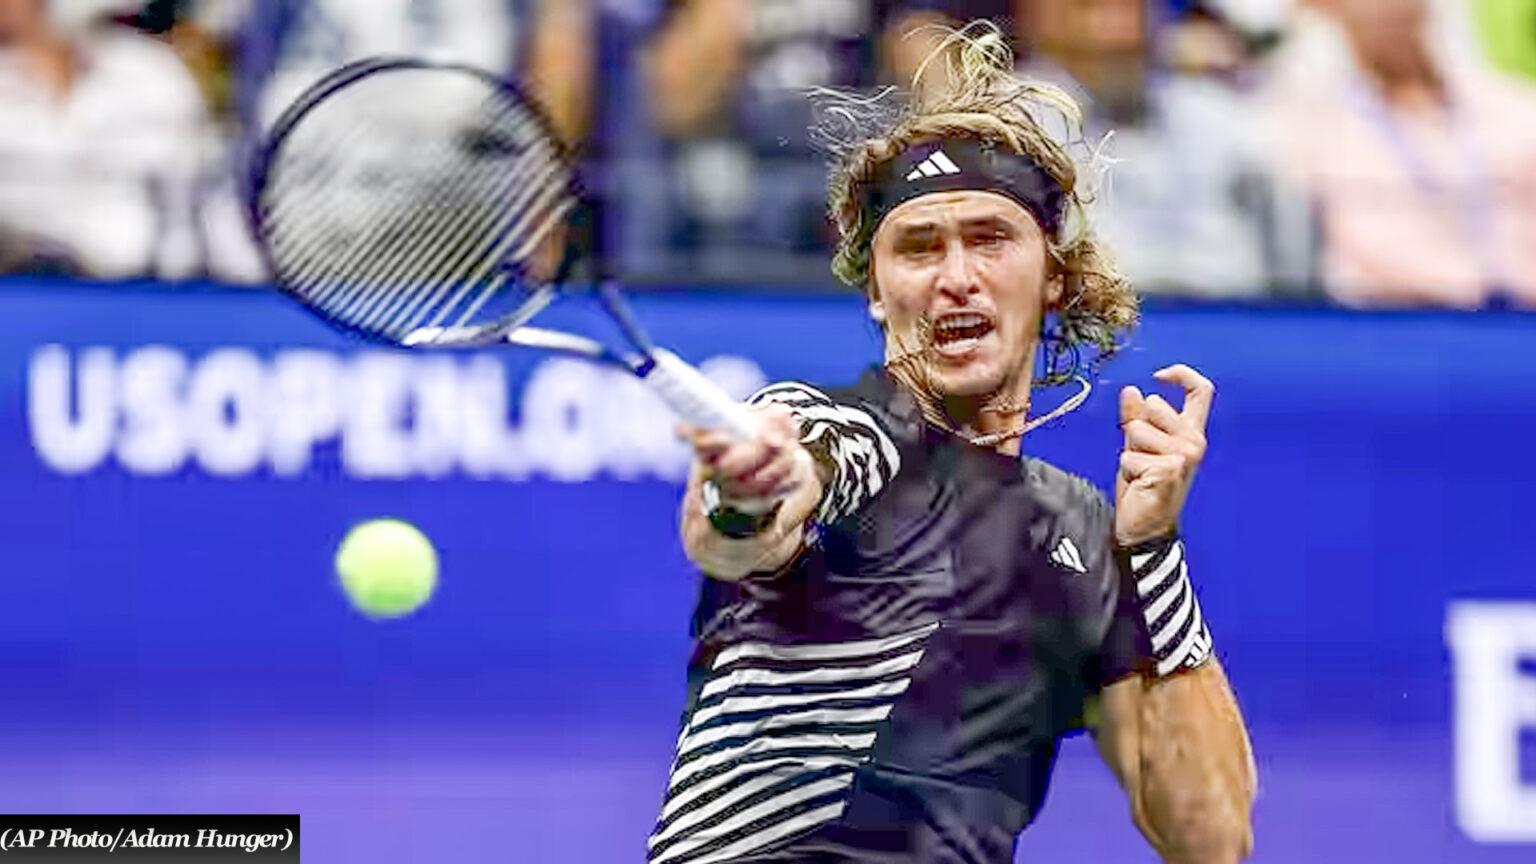 Controversy Erupts at U.S. Open as Fan Ejected for Alleged Hitler Reference During Zverev-Sinner Match